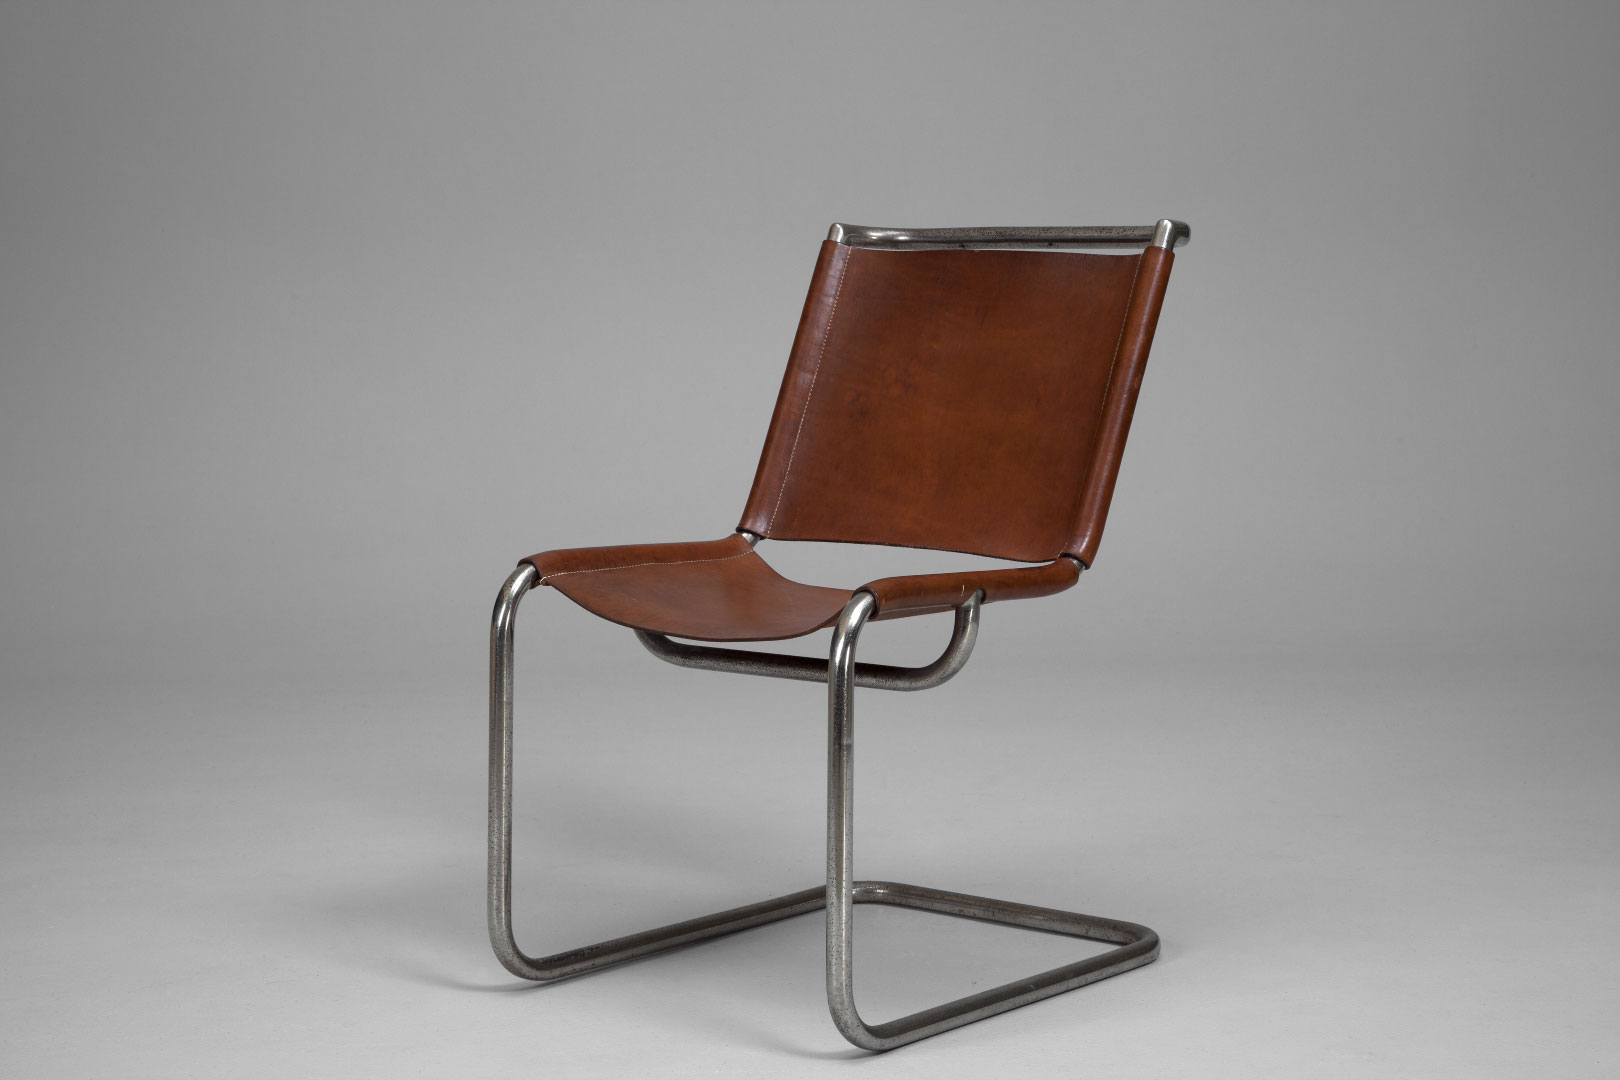 Cantilevered chair with tubular metal frame and a sheet of brown leather suspended between the bars for the seat and another for the back.